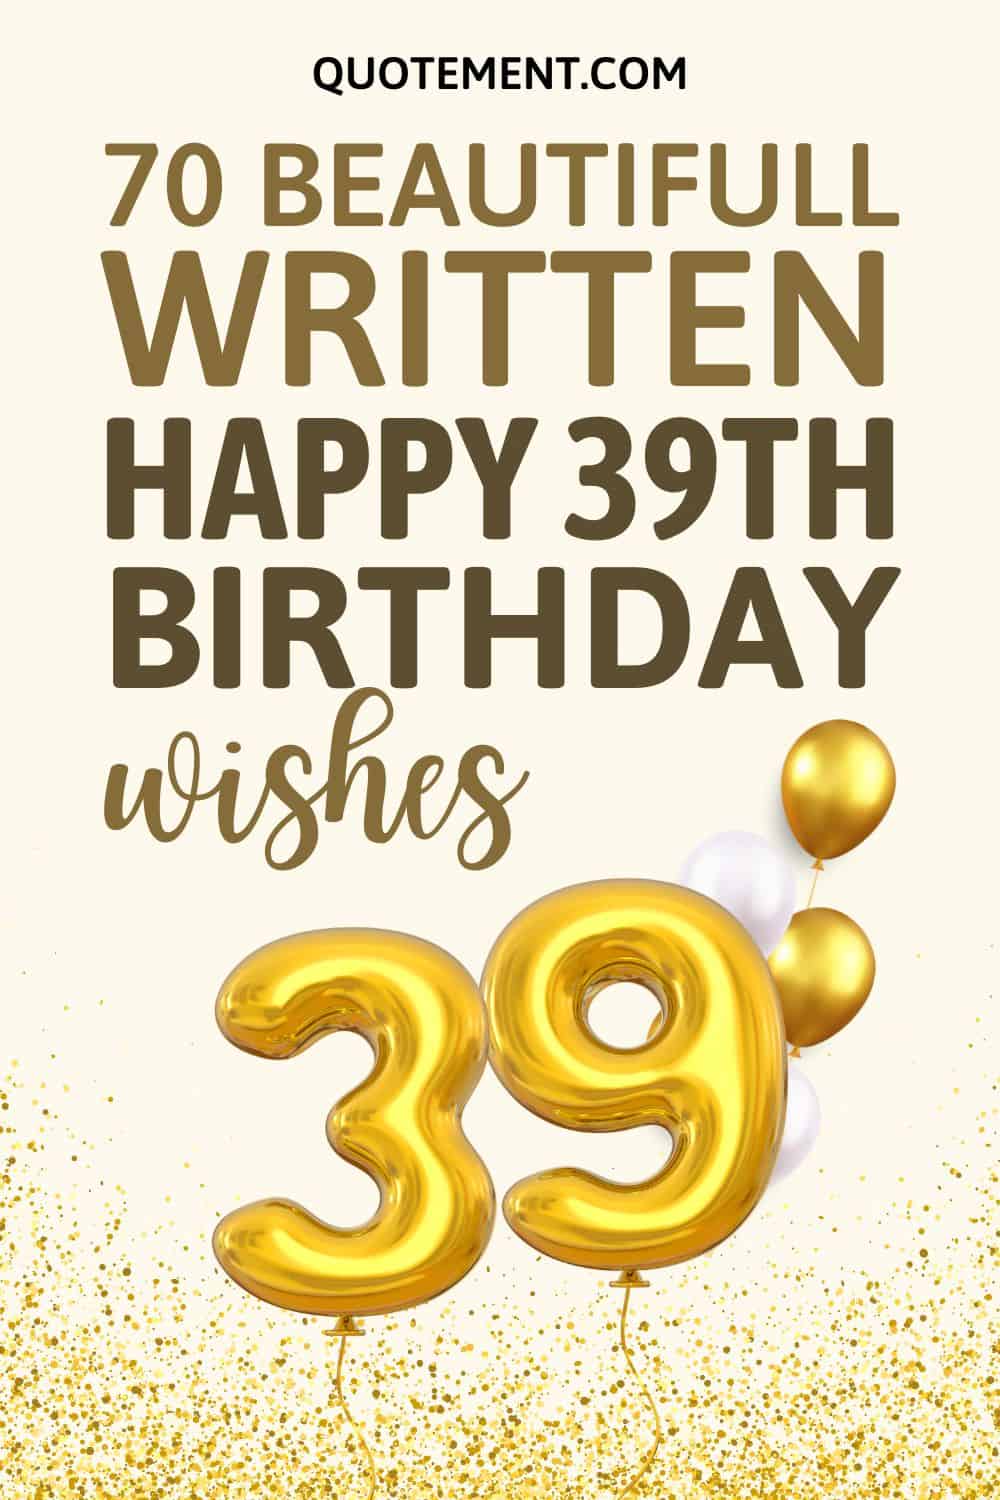 70 Happy 39th Birthday Wishes To Celebrate Your Loved Ones